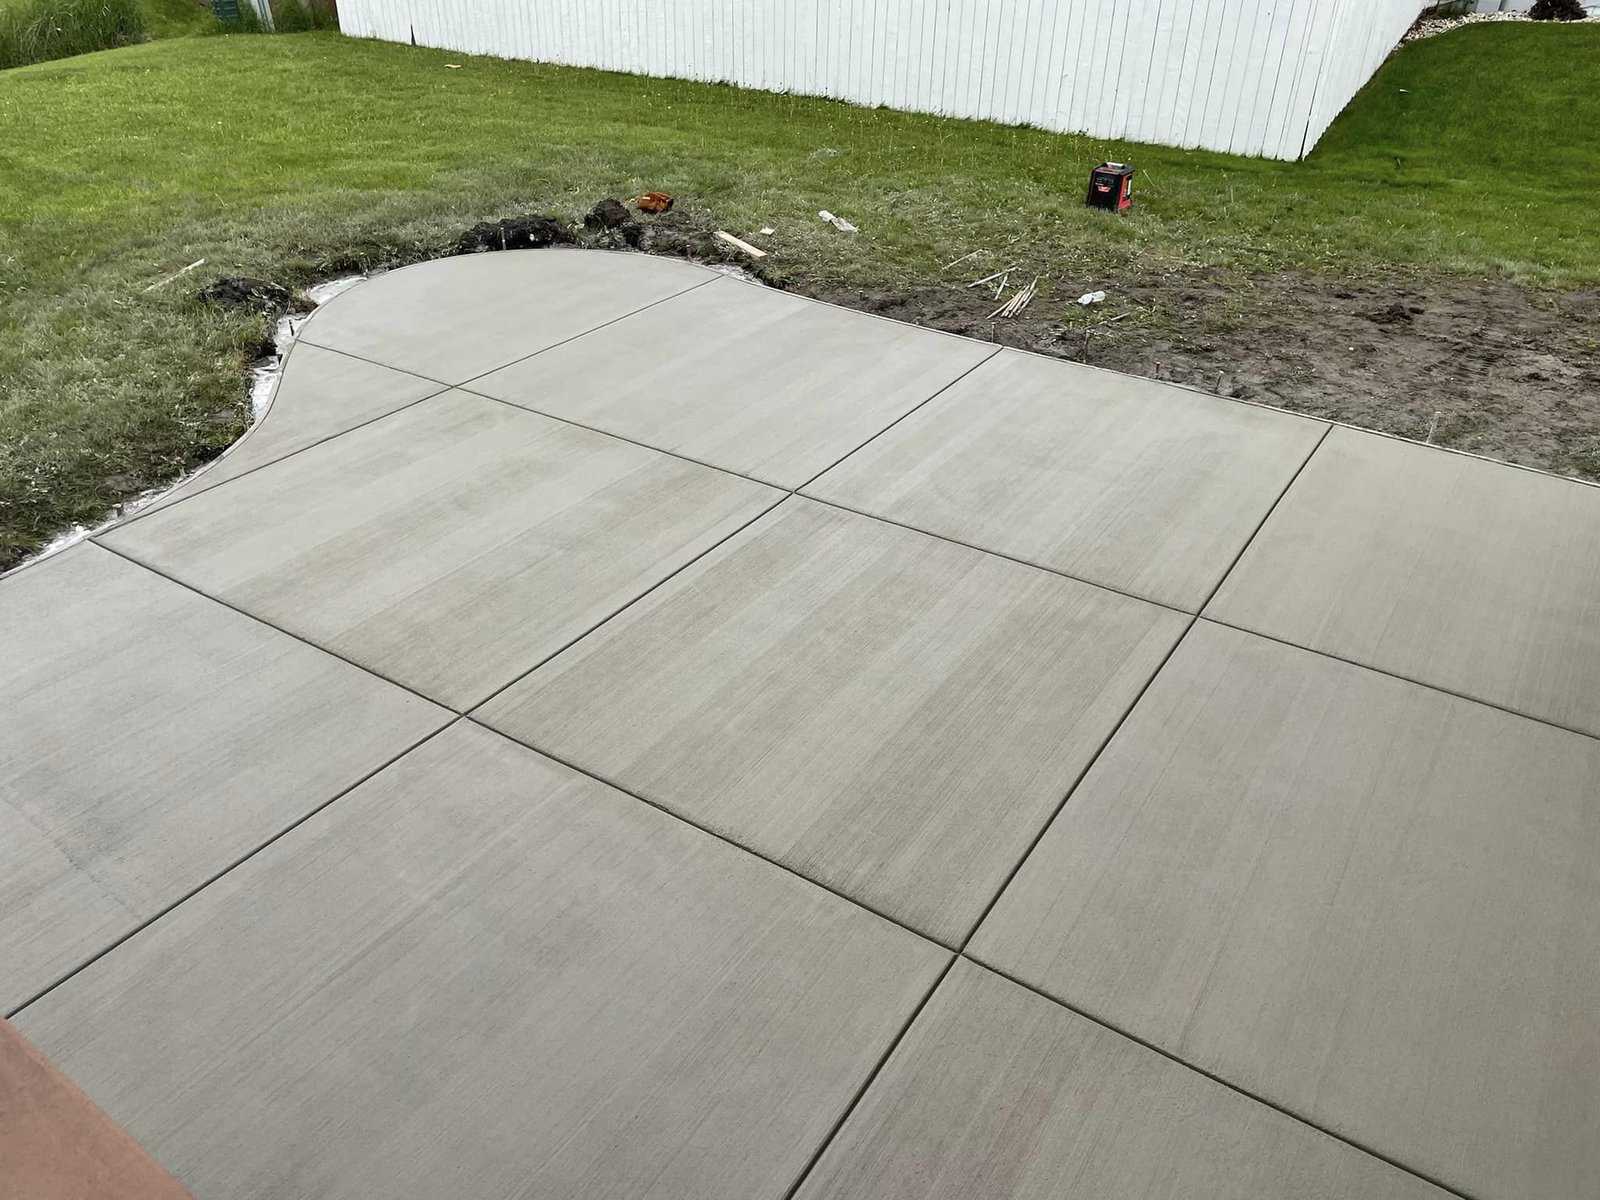 Newly poured concrete walkway with smooth finish and control joints, adjacent to a grassy area with gardening tools in the background.